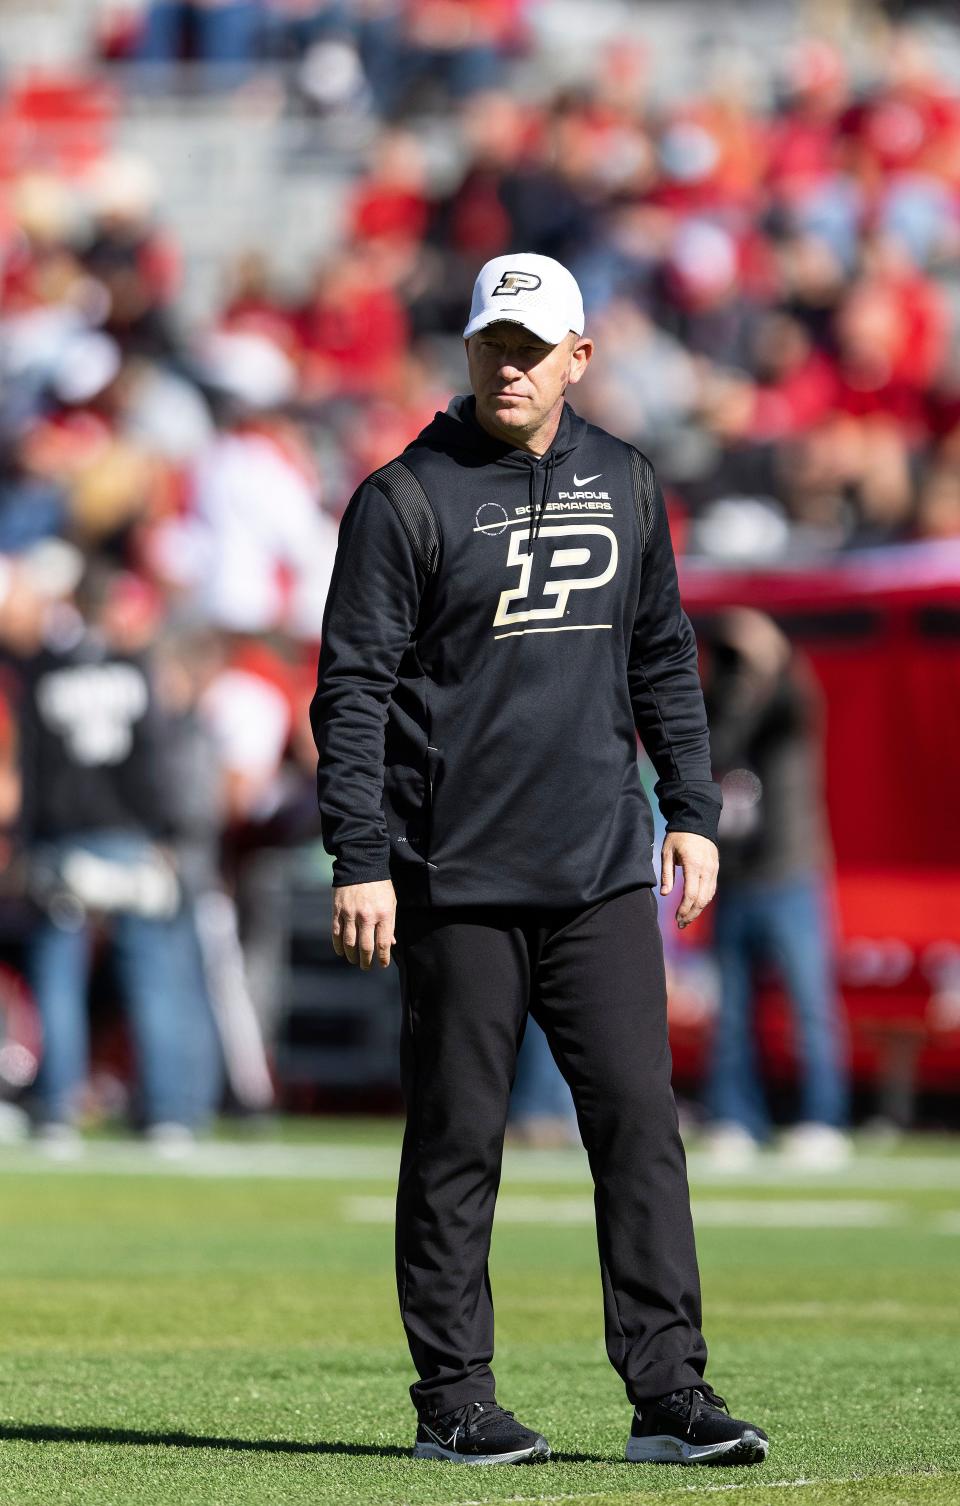 Purdue head coach Jeff Brohm watches his players warm up before playing against Nebraska in an NCAA college football game Saturday, Oct. 30, 2021, at Memorial Stadium in Lincoln, Neb. (AP Photo/Rebecca S. Gratz)